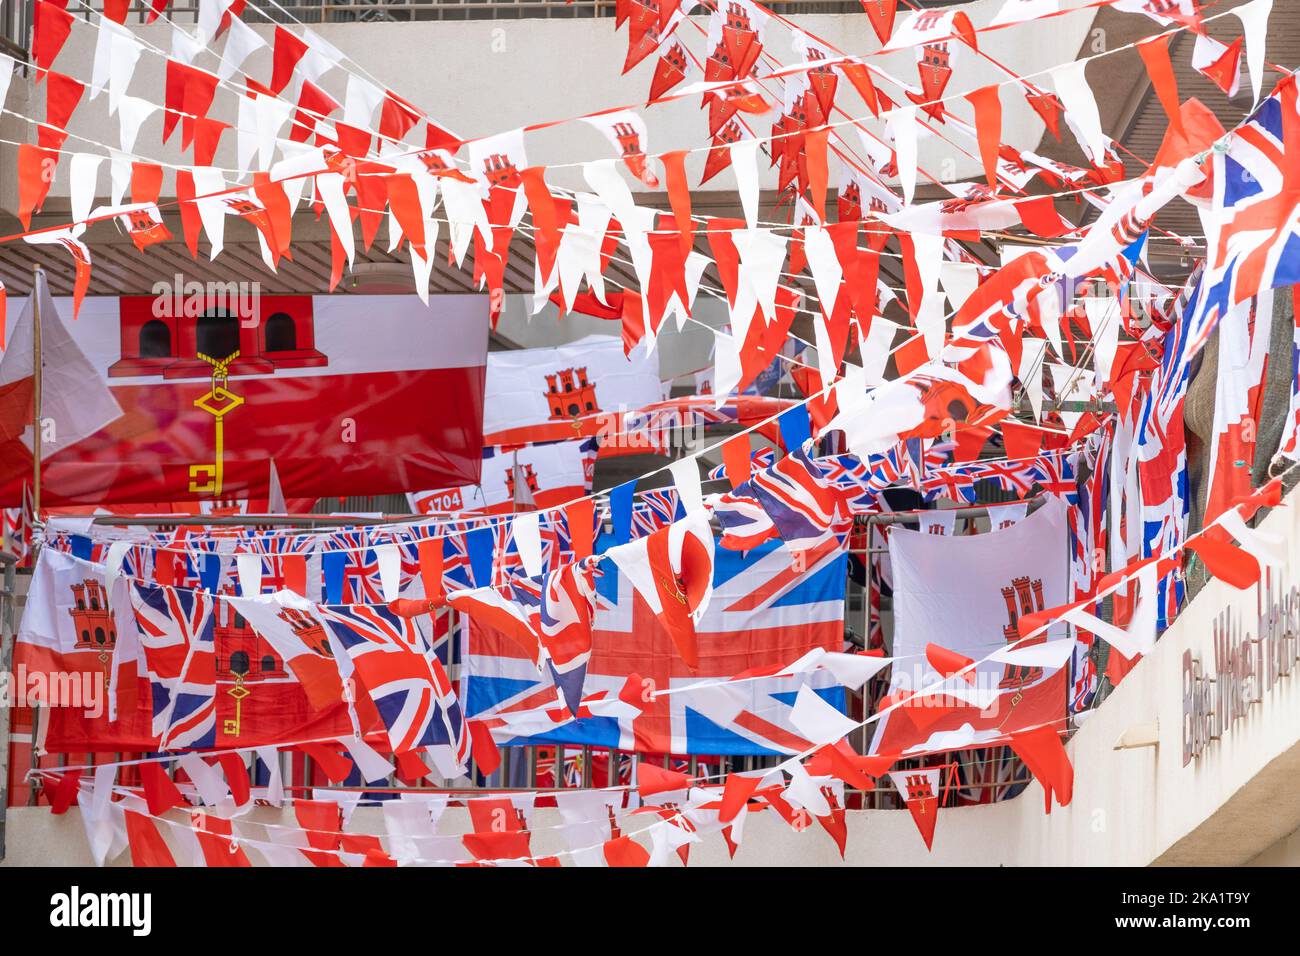 Lots of red and white bunting with national flags hanging across the staircase of an apartment block in Gibraltar. Stock Photo